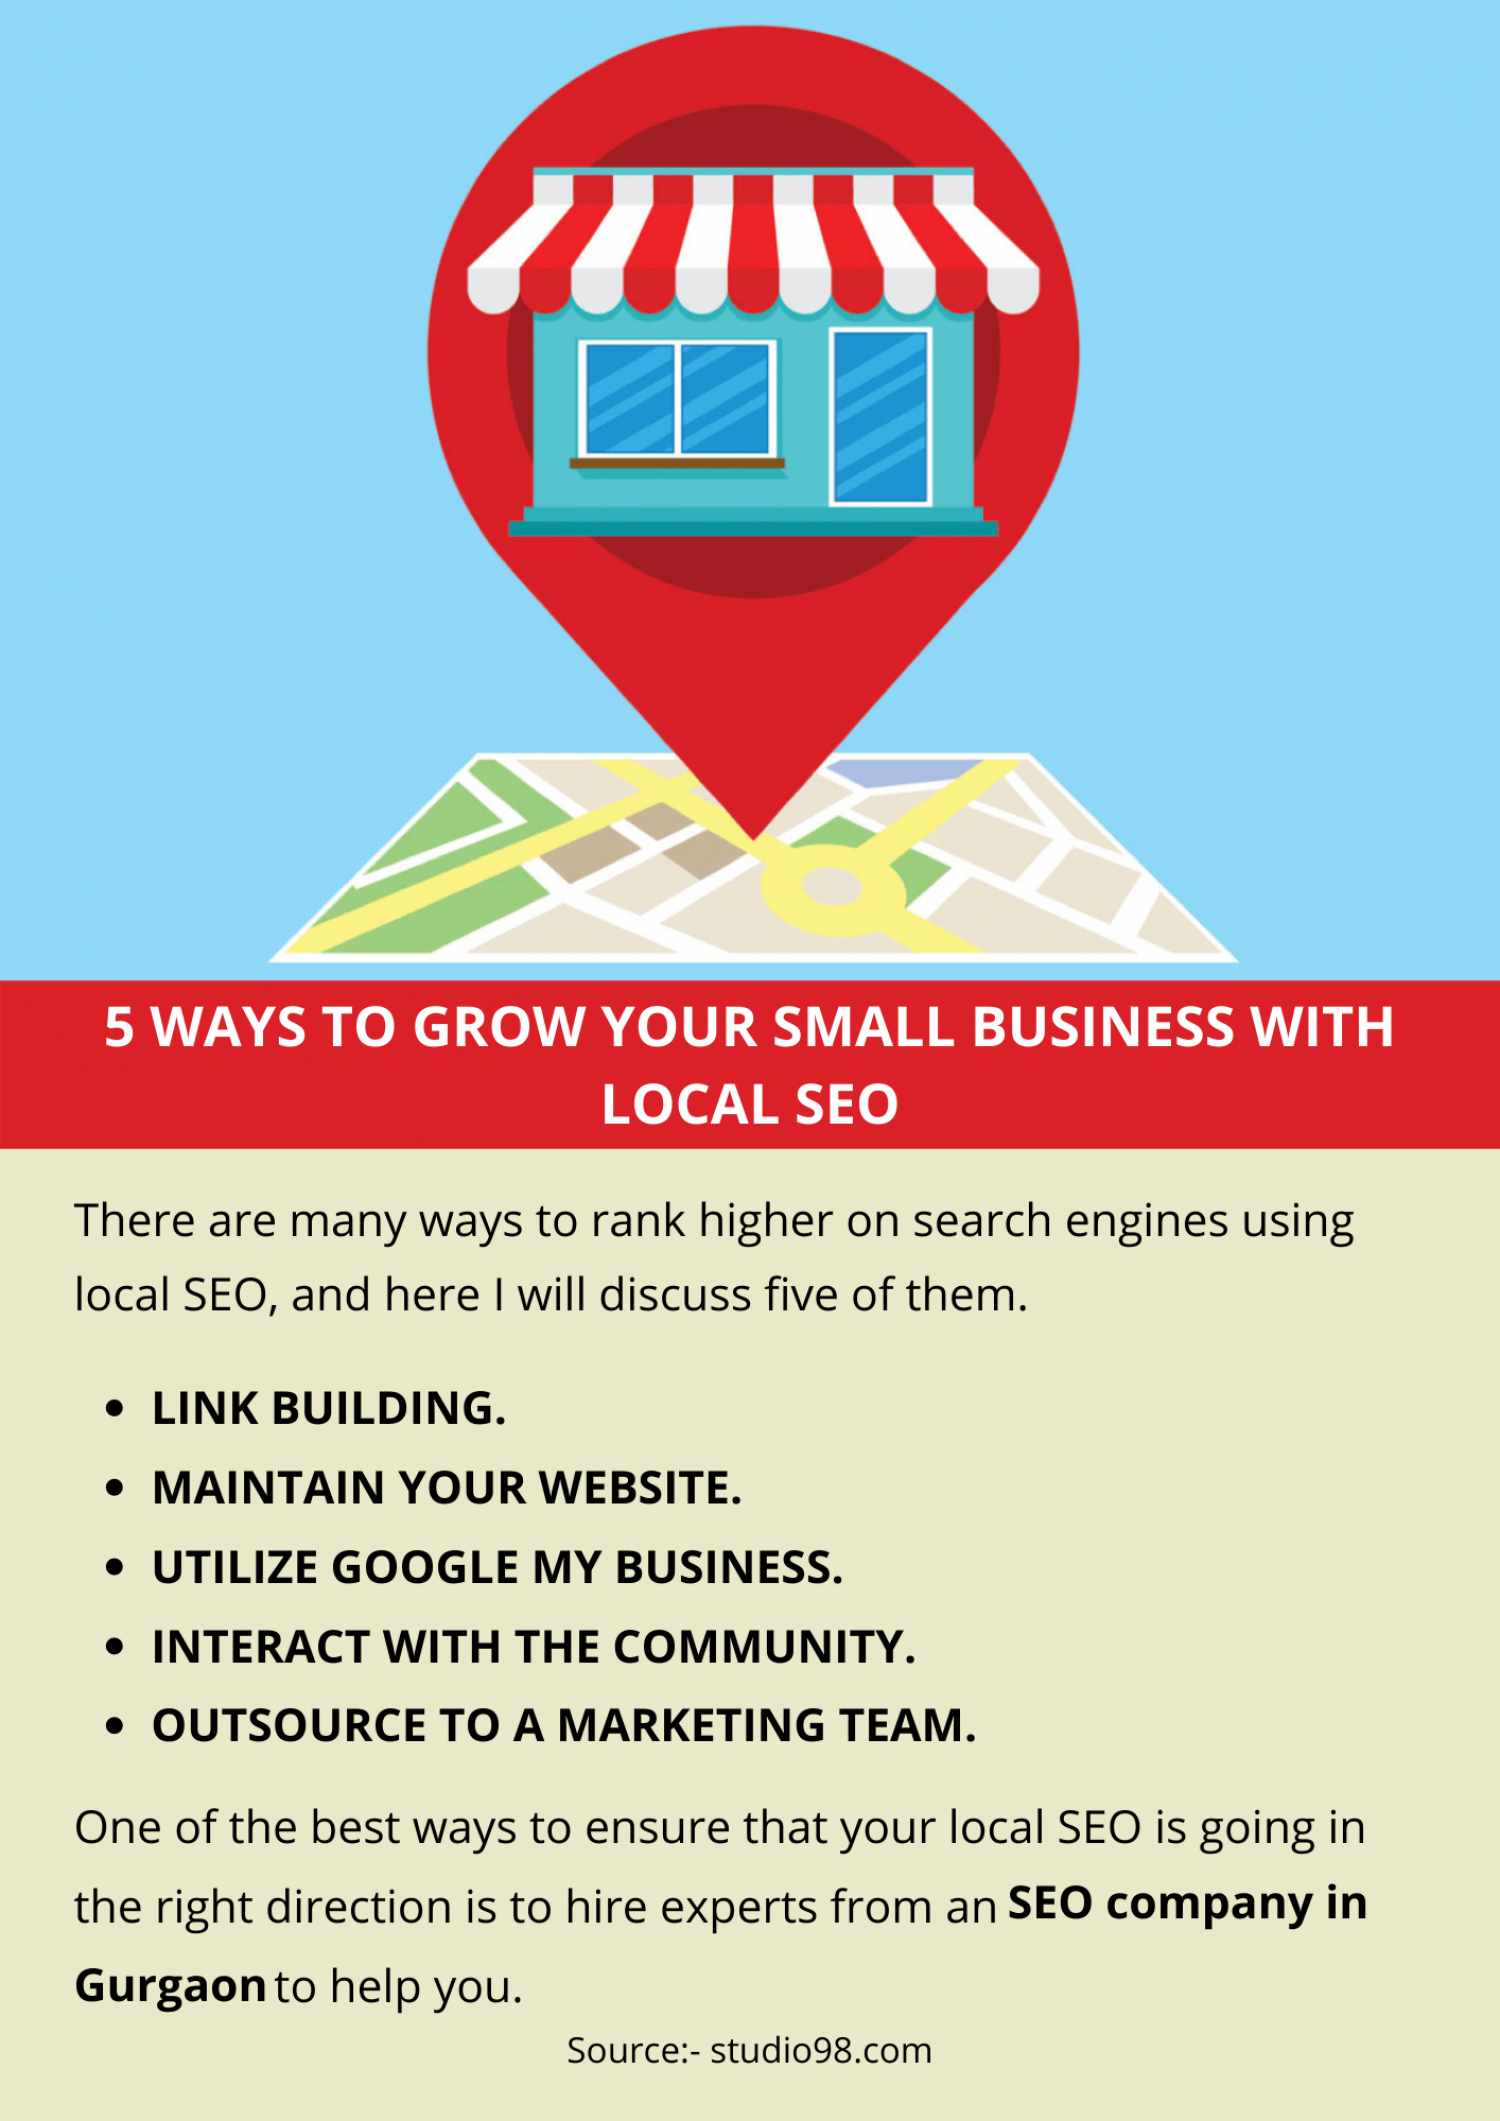 5 WAYS TO GROW YOUR SMALL BUSINESS WITH LOCAL SEO Infographic